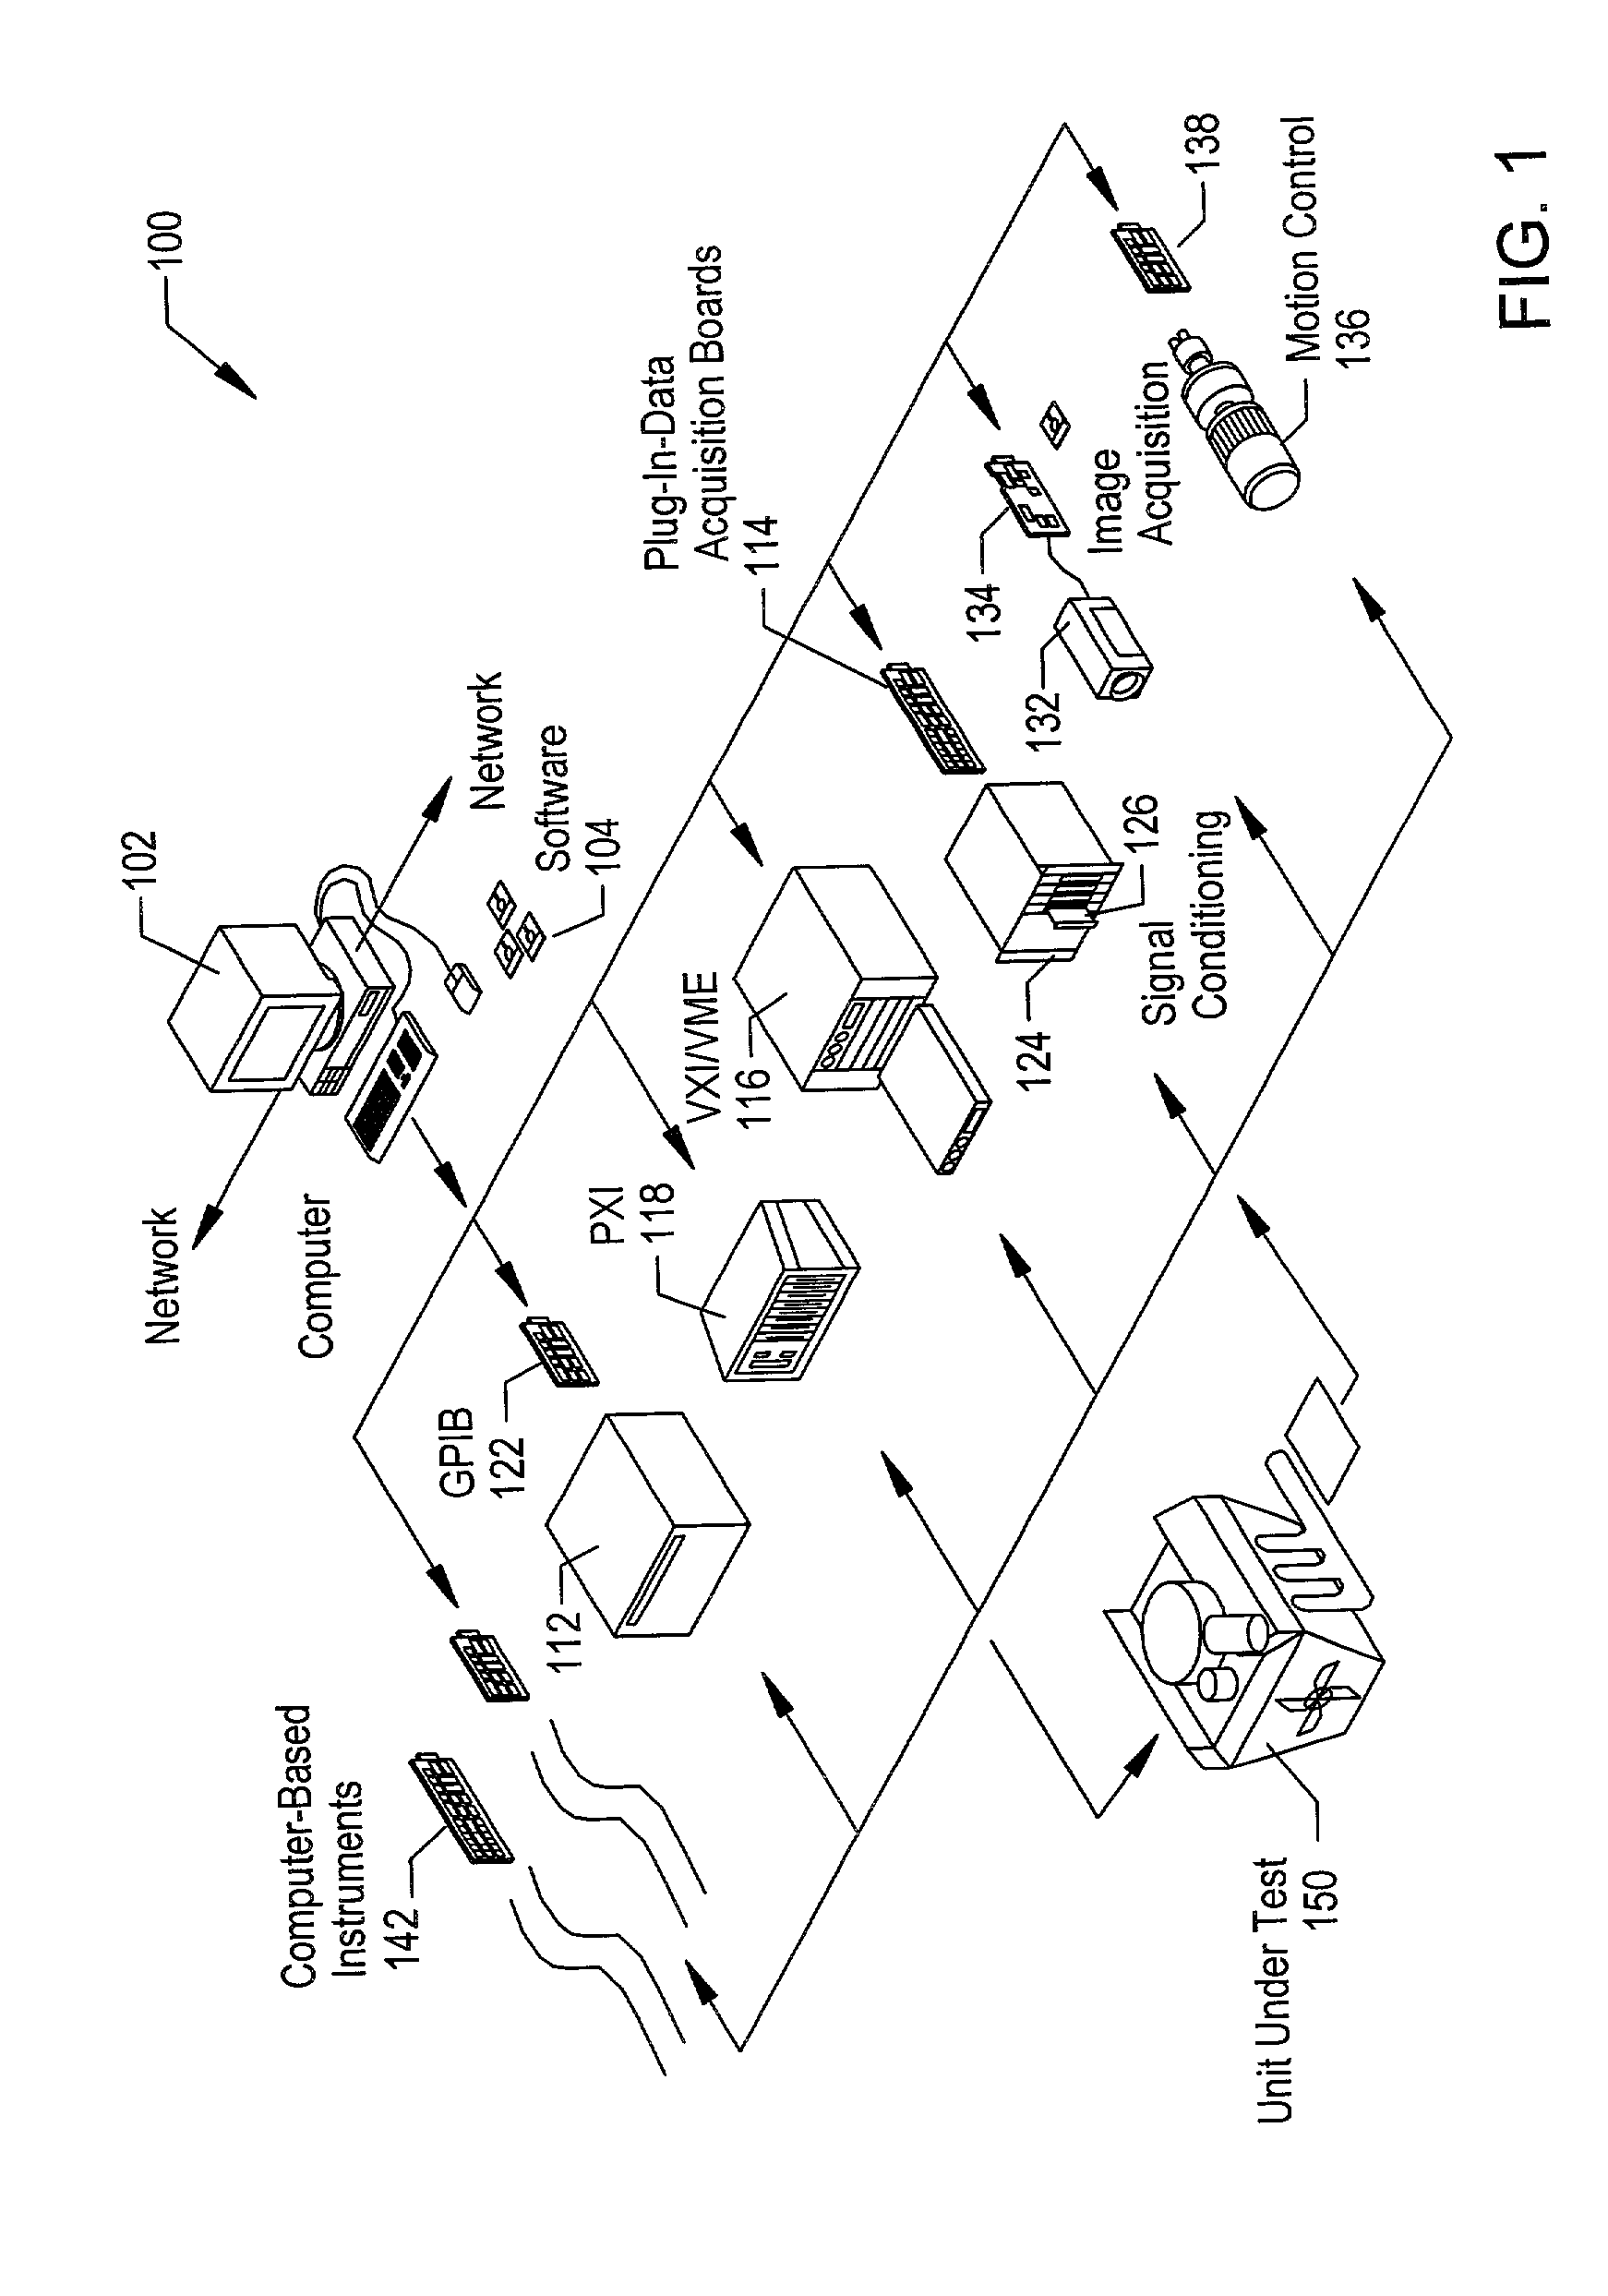 System and method for synchronizing execution of a batch of threads